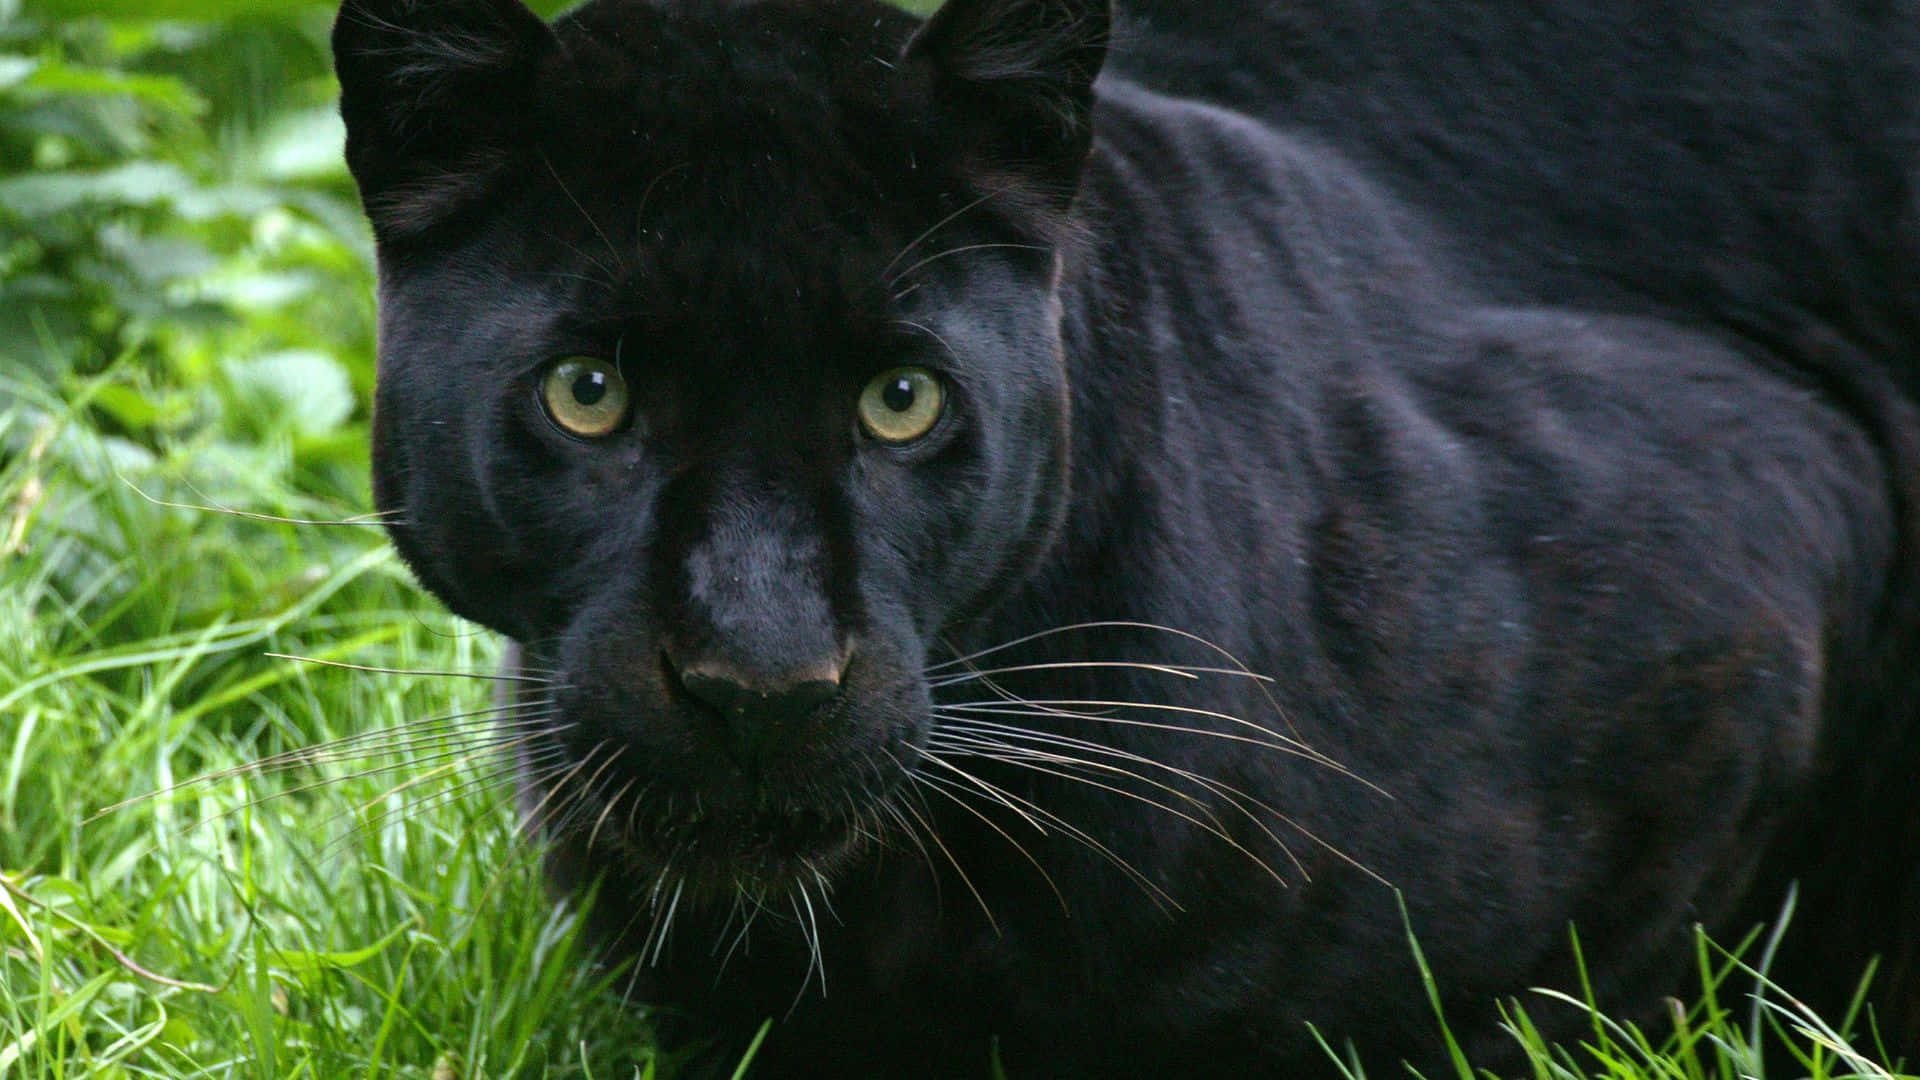 Majestic Black Panther Prowling in the Jungle